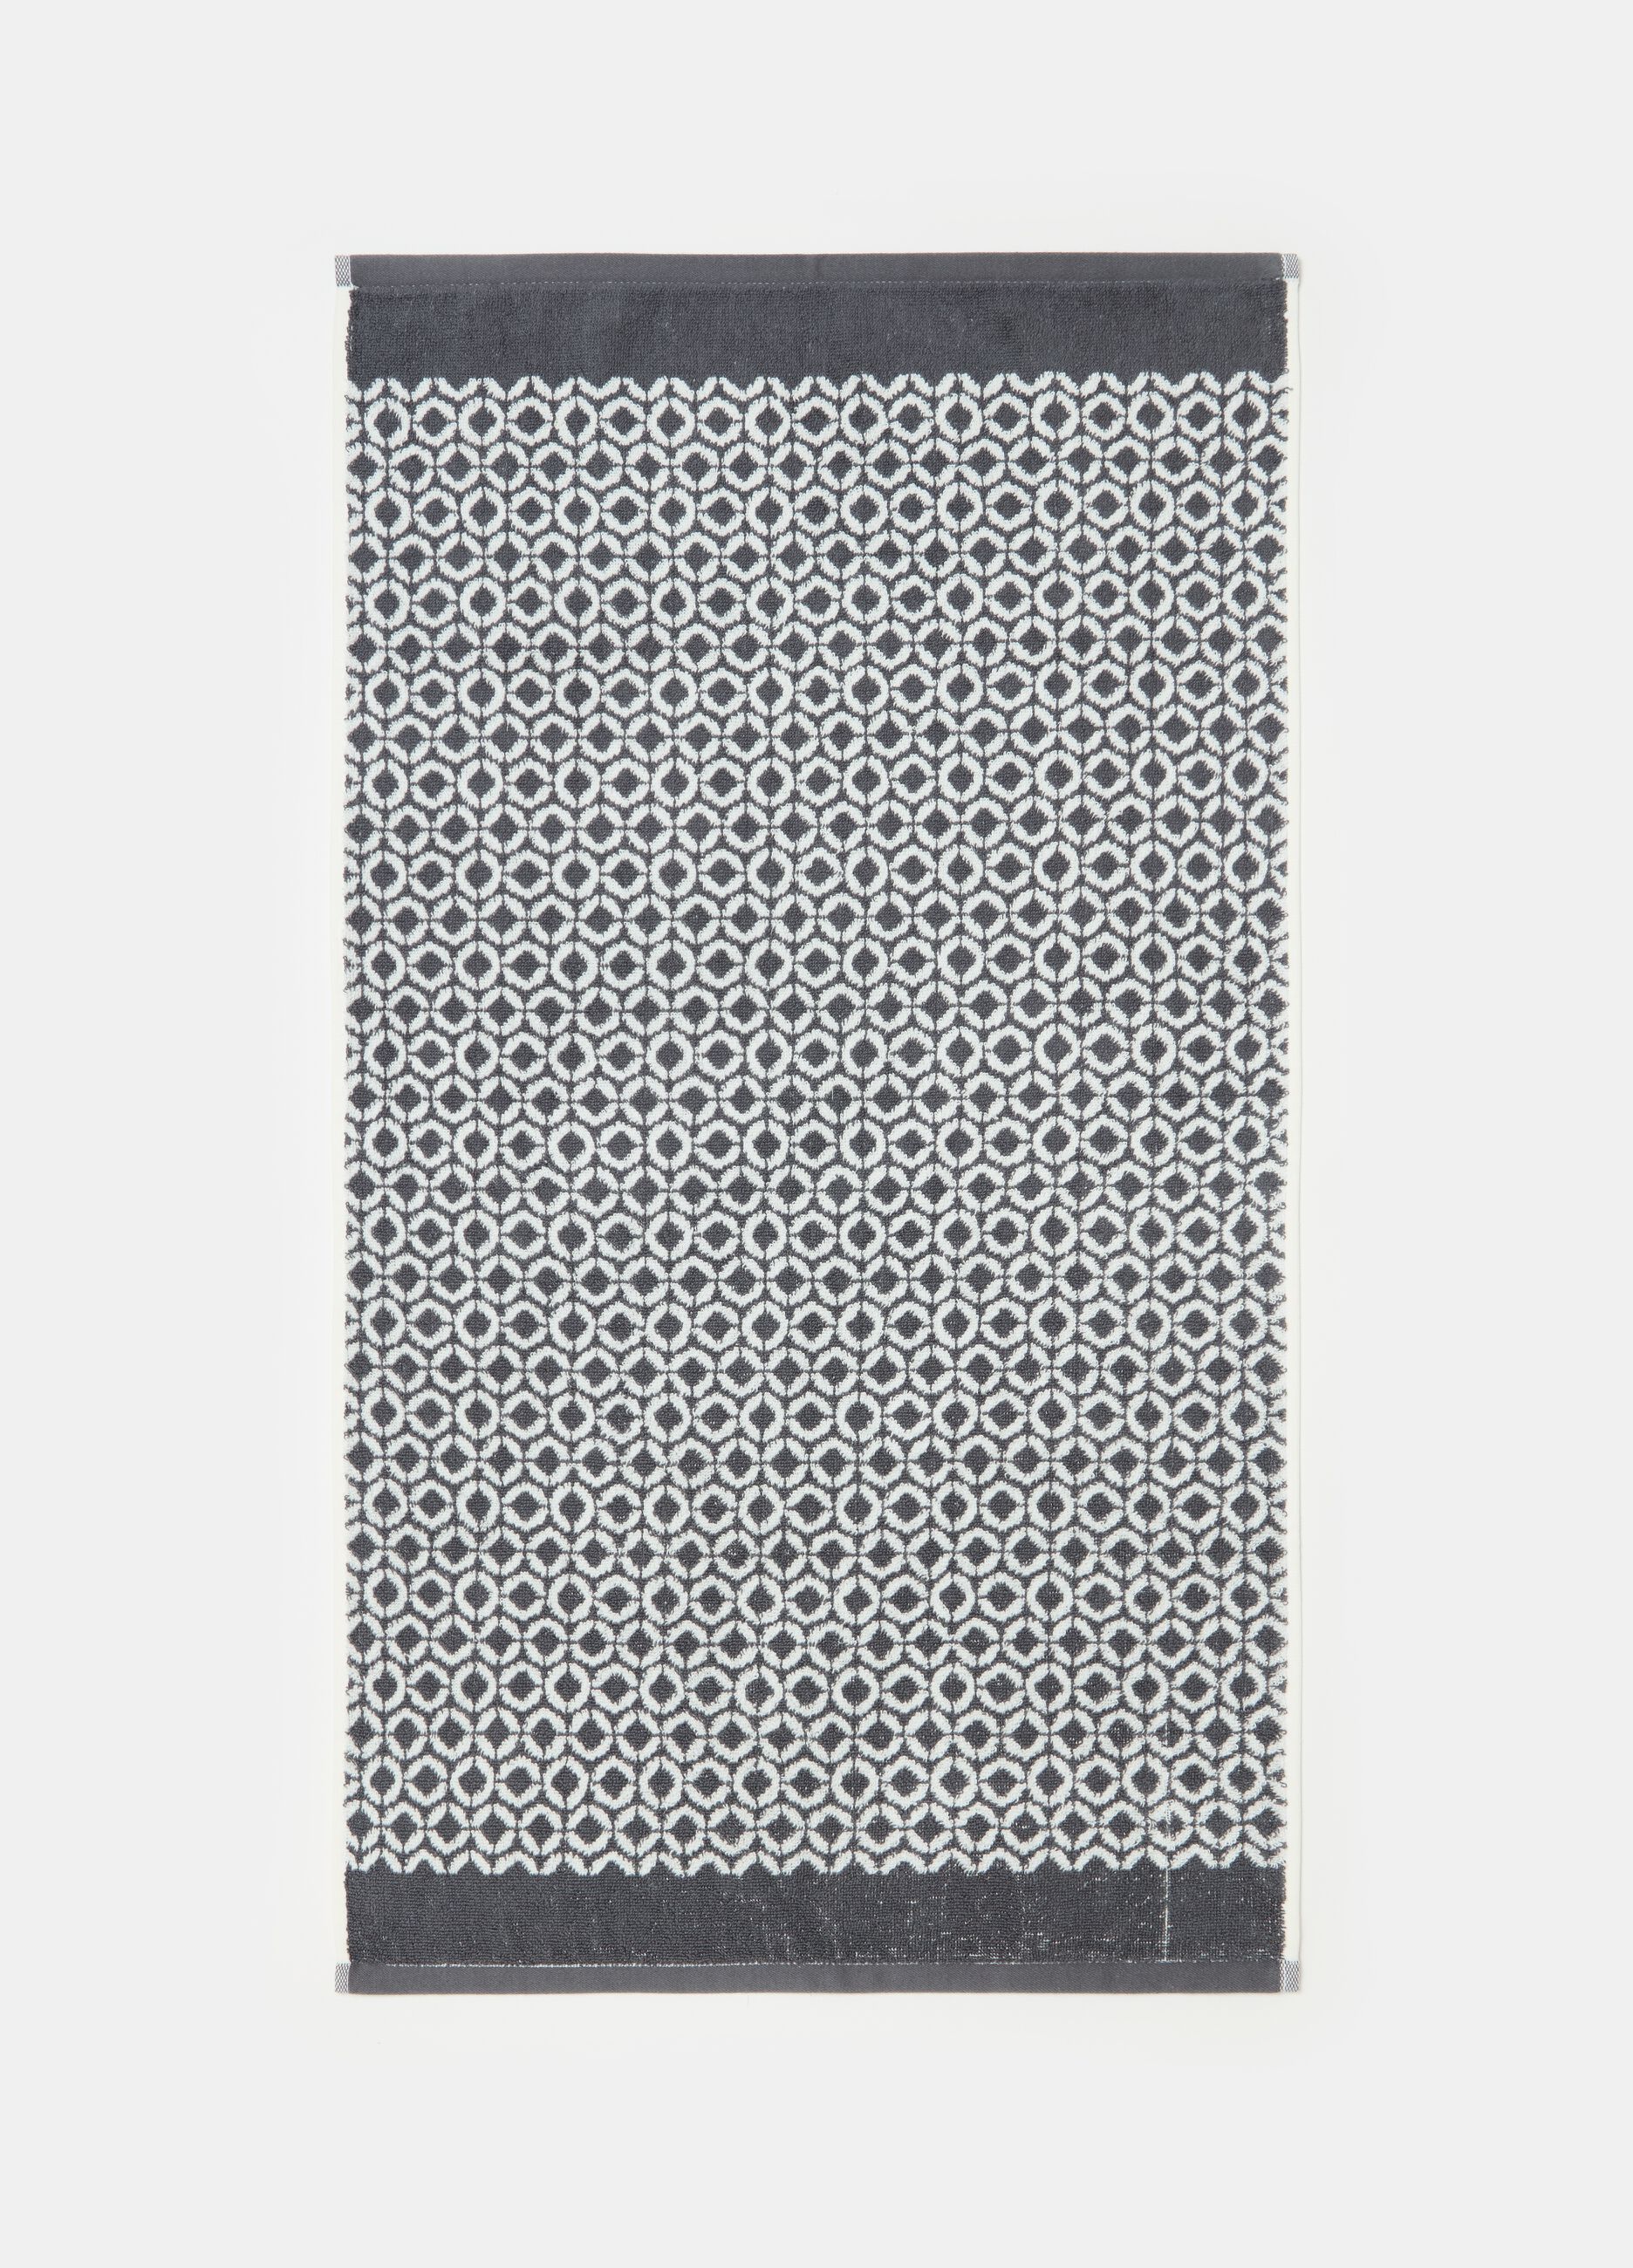 Face towel with dots pattern